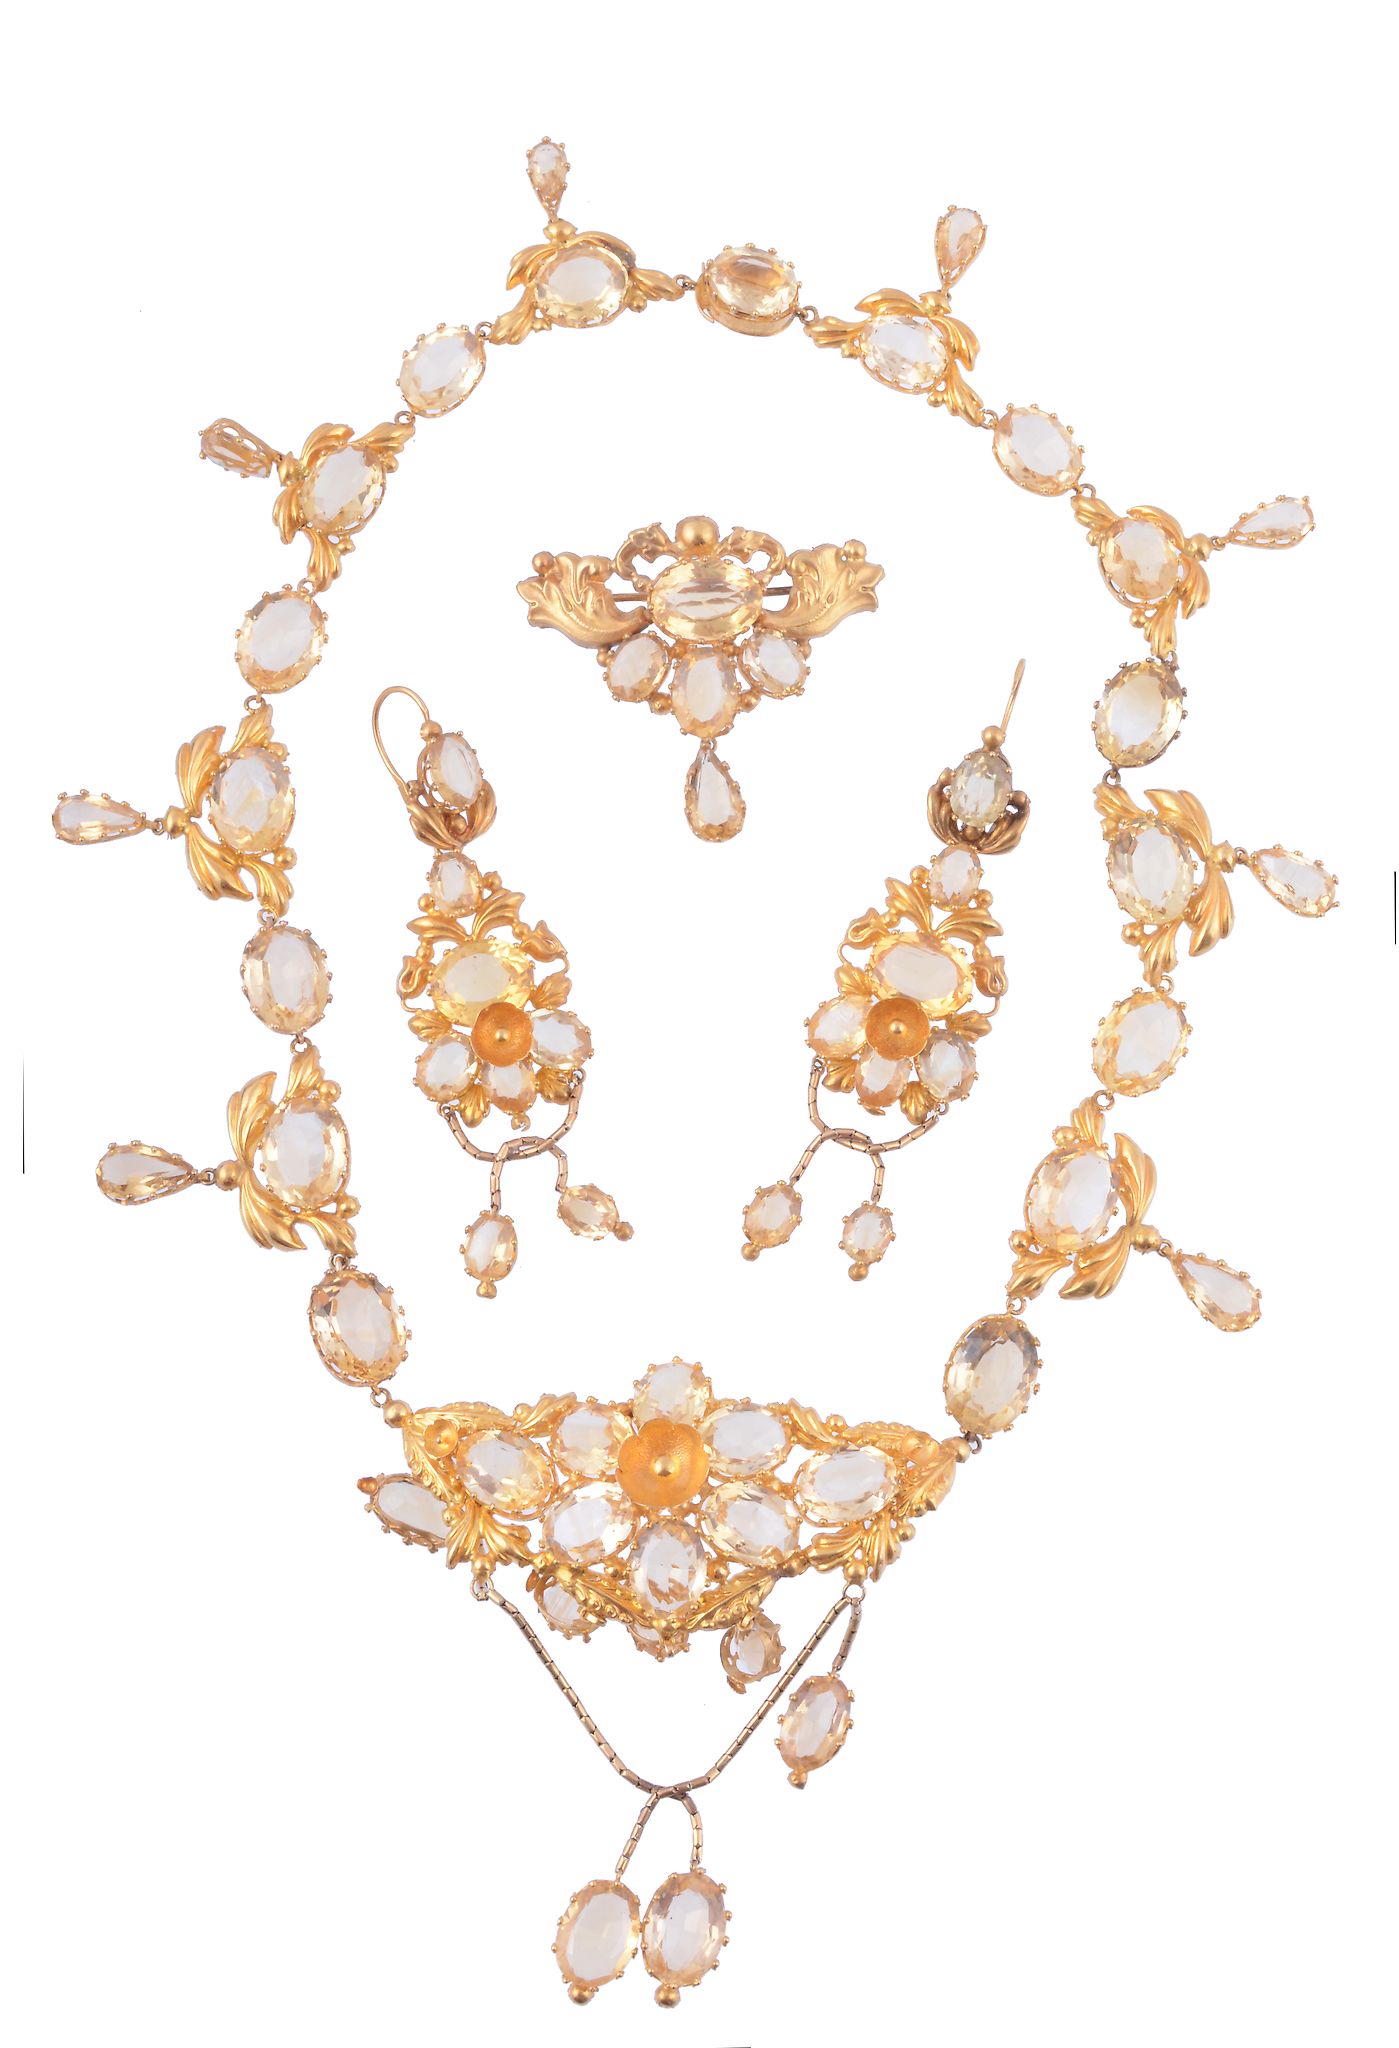 A mid Victorian gold and citrine necklace  A mid Victorian gold and citrine necklace, earring and